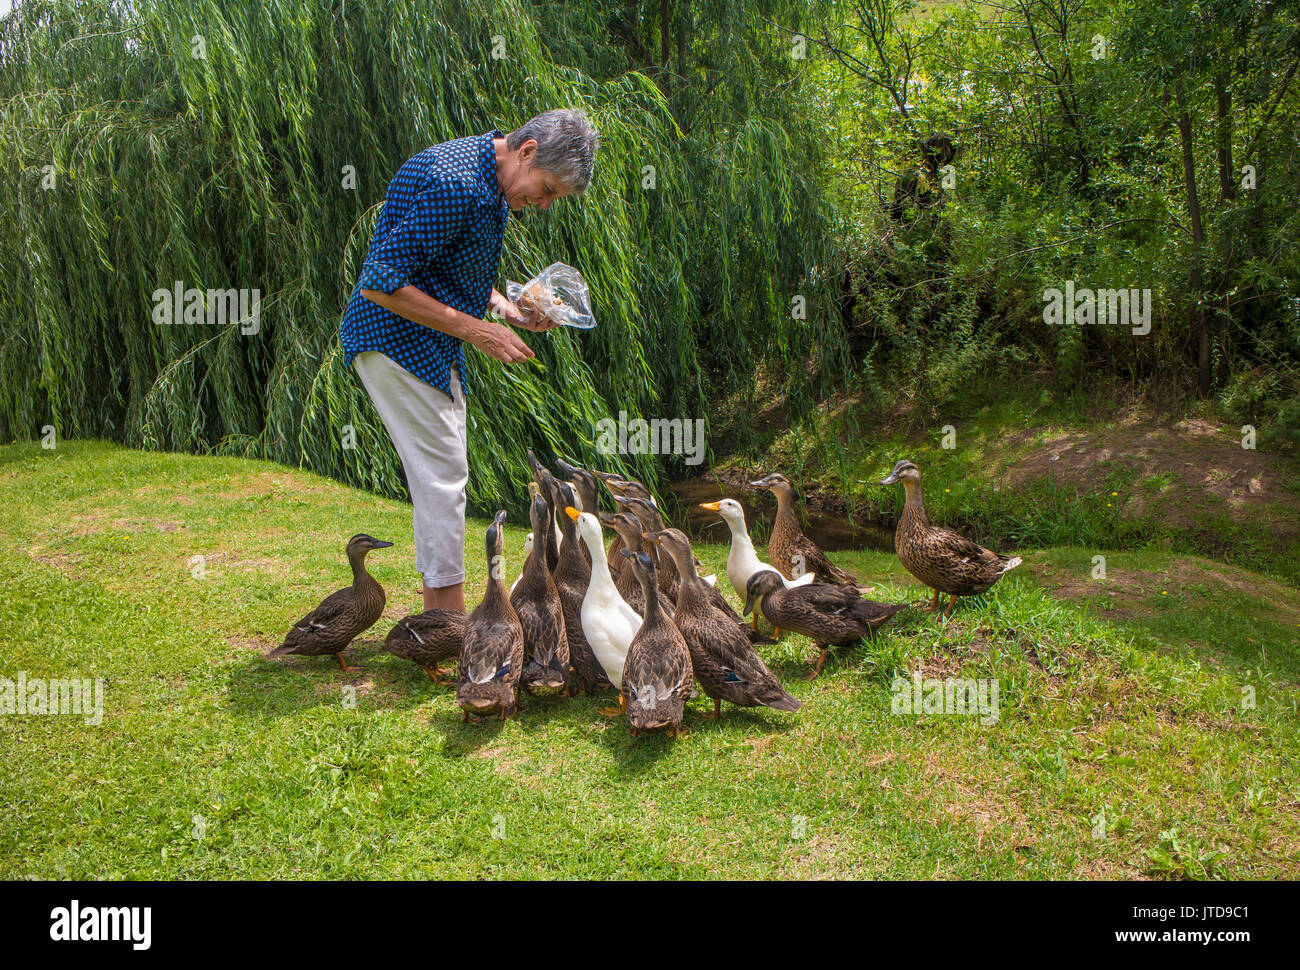 A woman feeds a brace of greedy ducks on the lawn next to a placid stream in Clarens Stock Photo